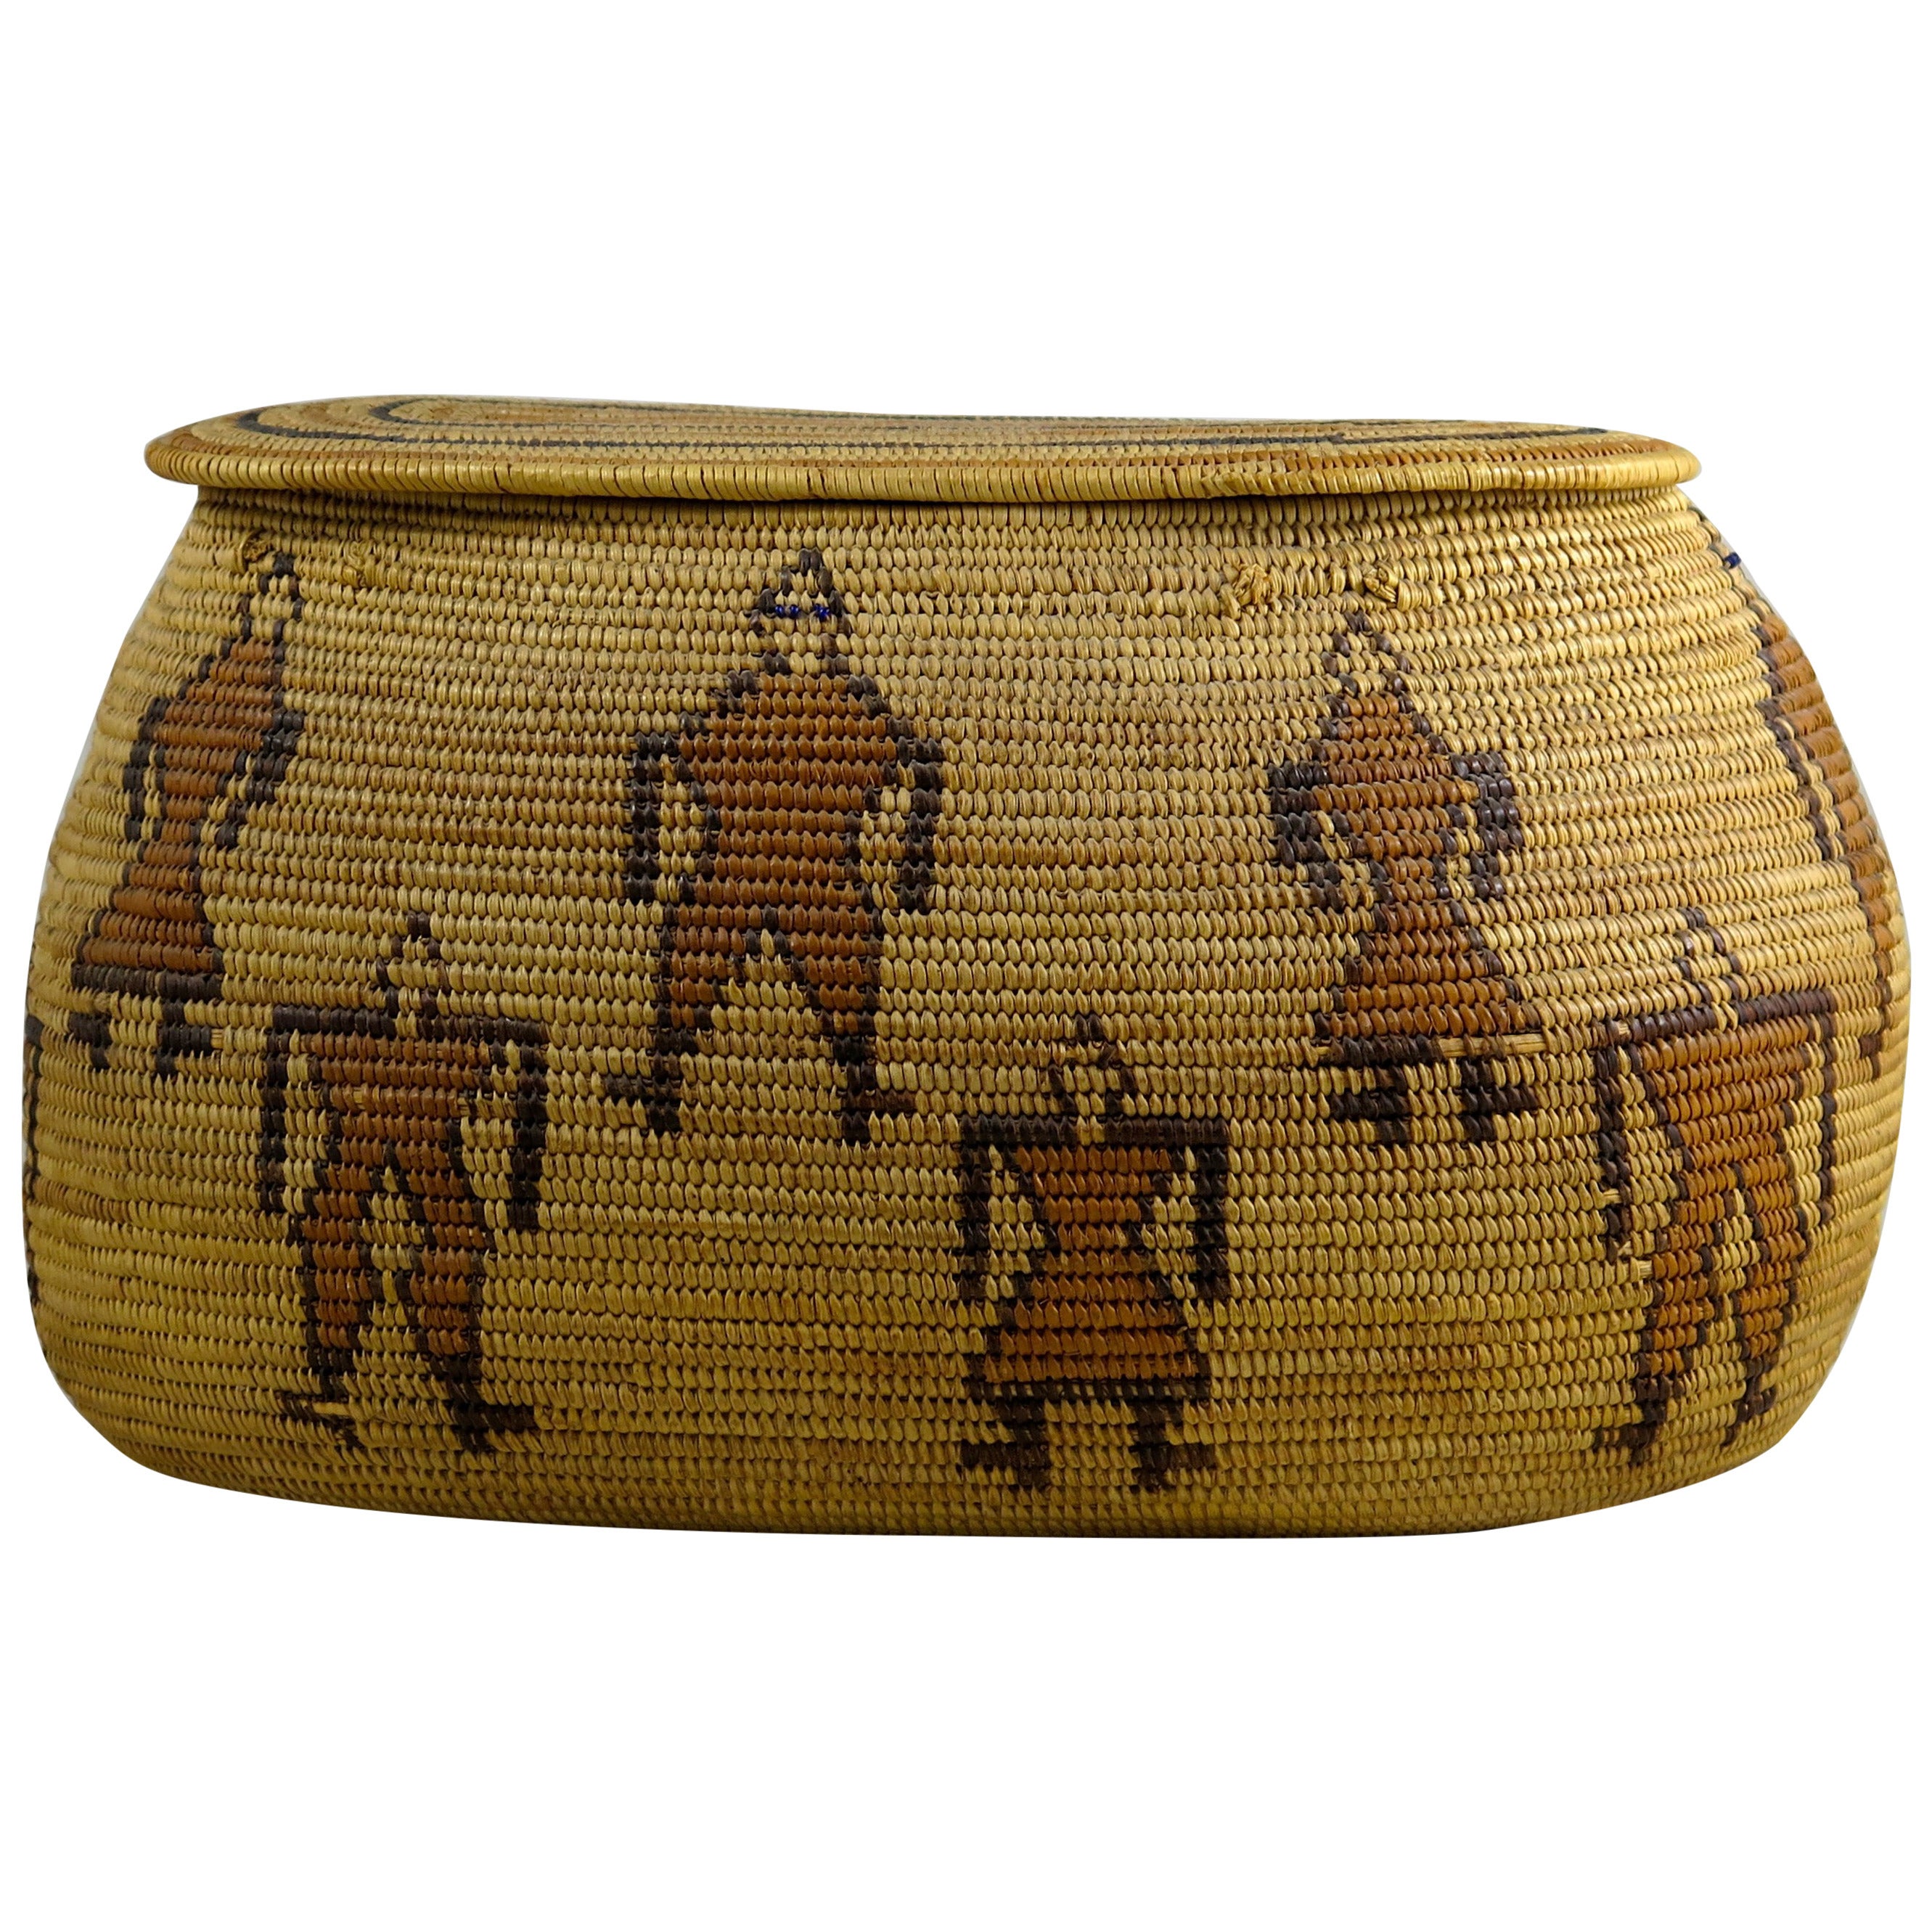 Rare 29 Palms Chemehuevi Native American Basket, Early 20th Century For Sale